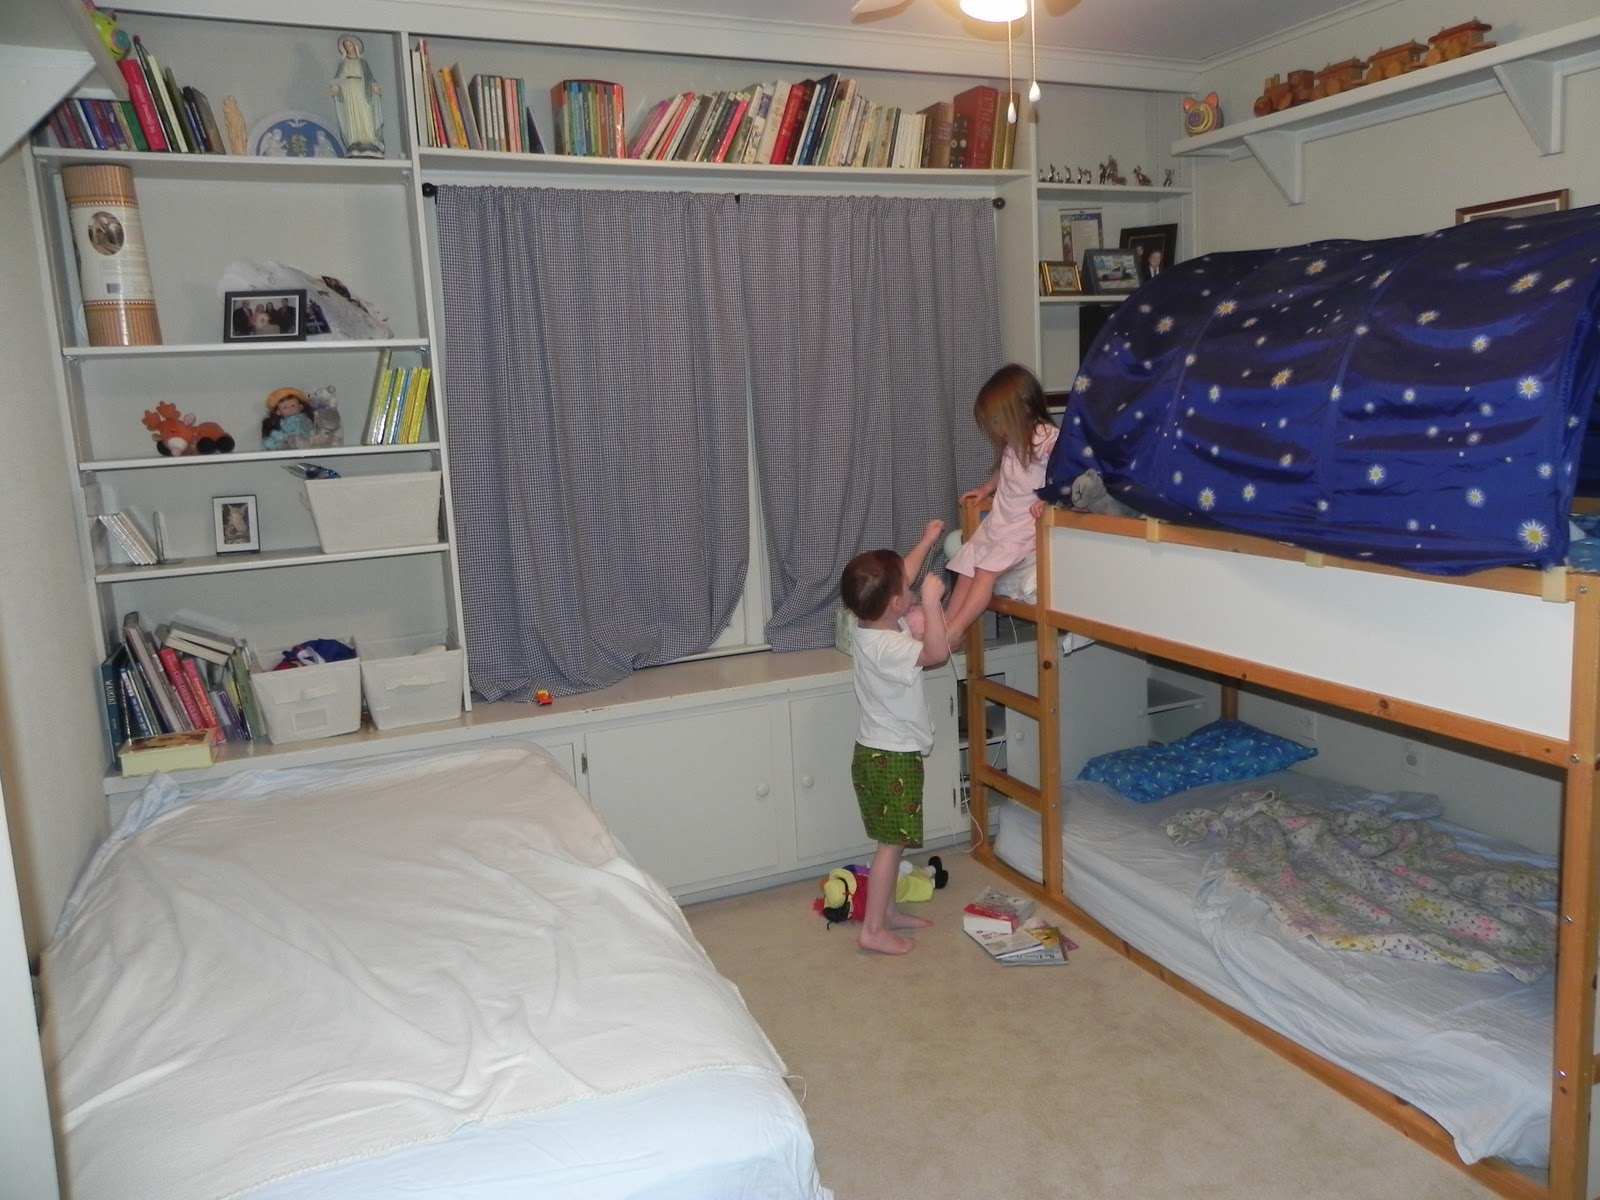 Gloria in Excelsis Deo: Unexpected New Bunk Bed